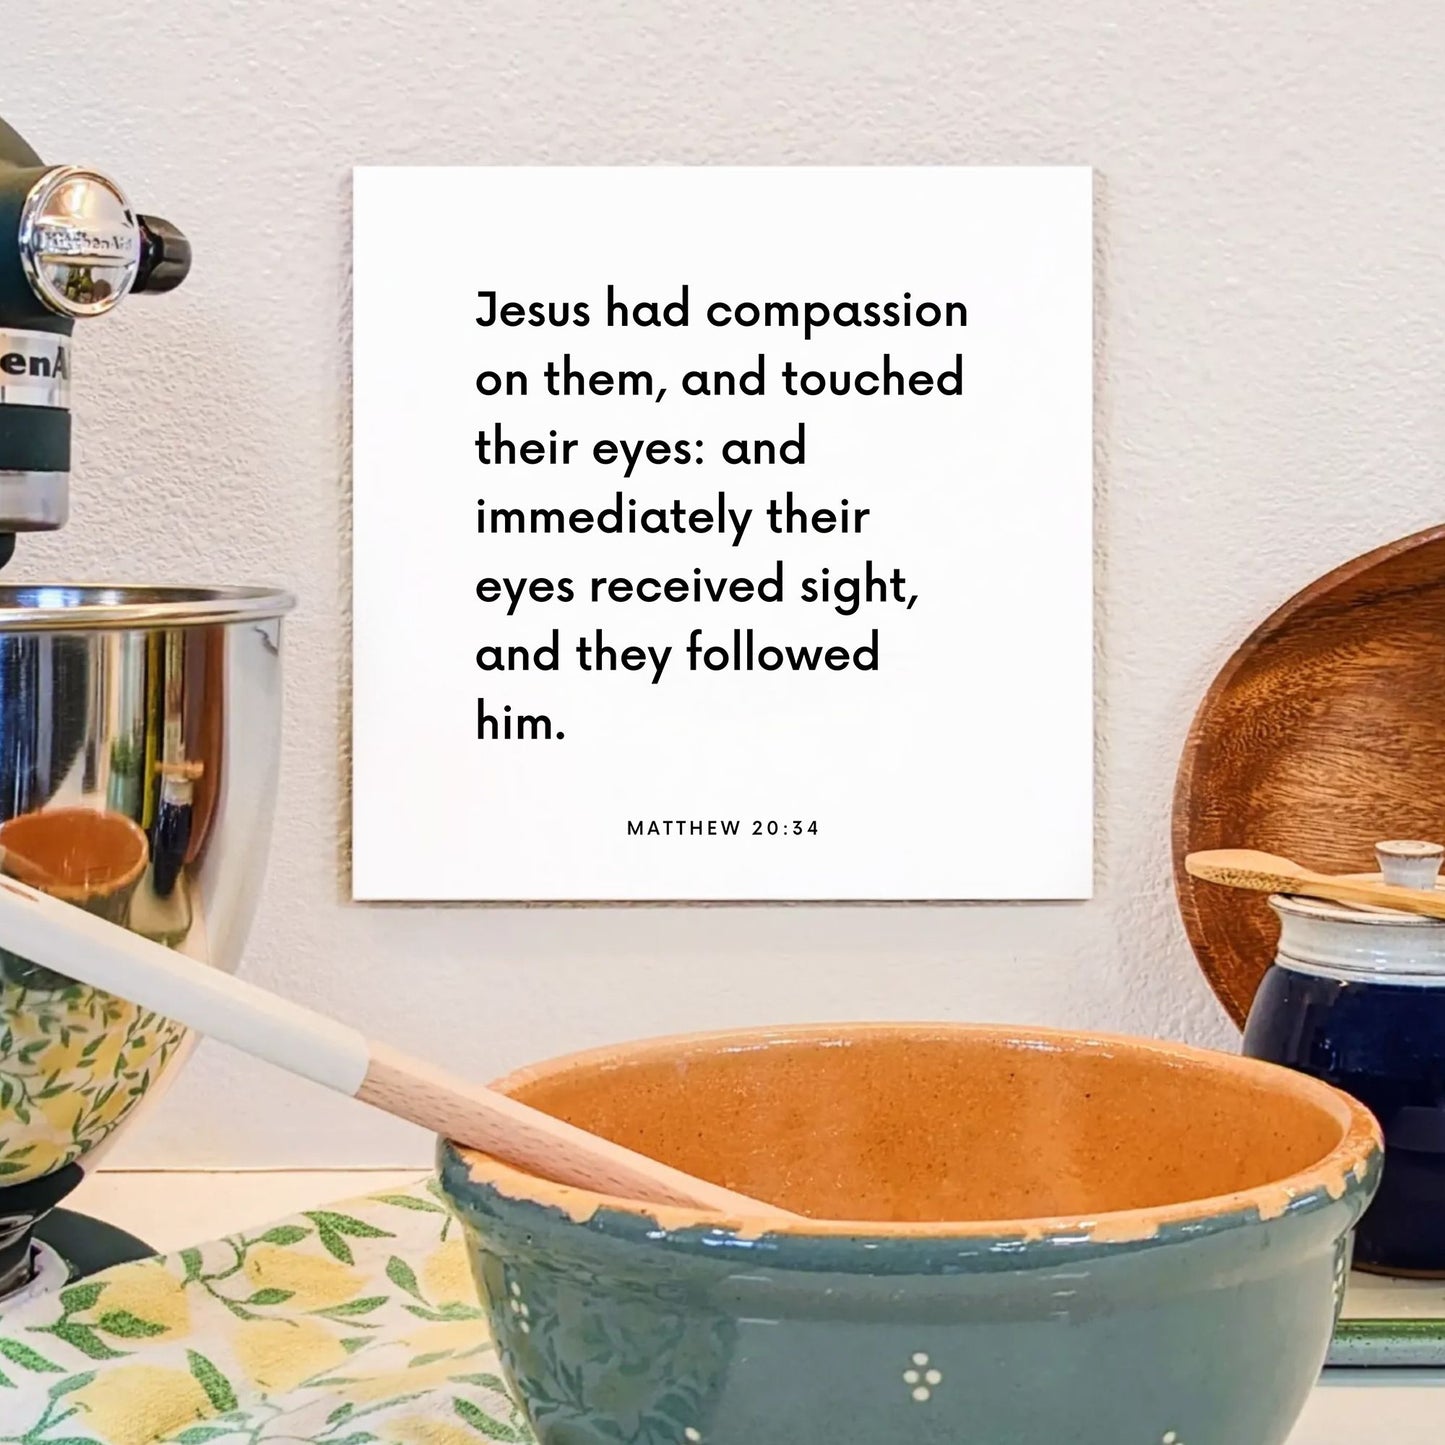 Kitchen mouting of the scripture tile for Matthew 20:34 - "Jesus had compassion on them, and touched their eyes"